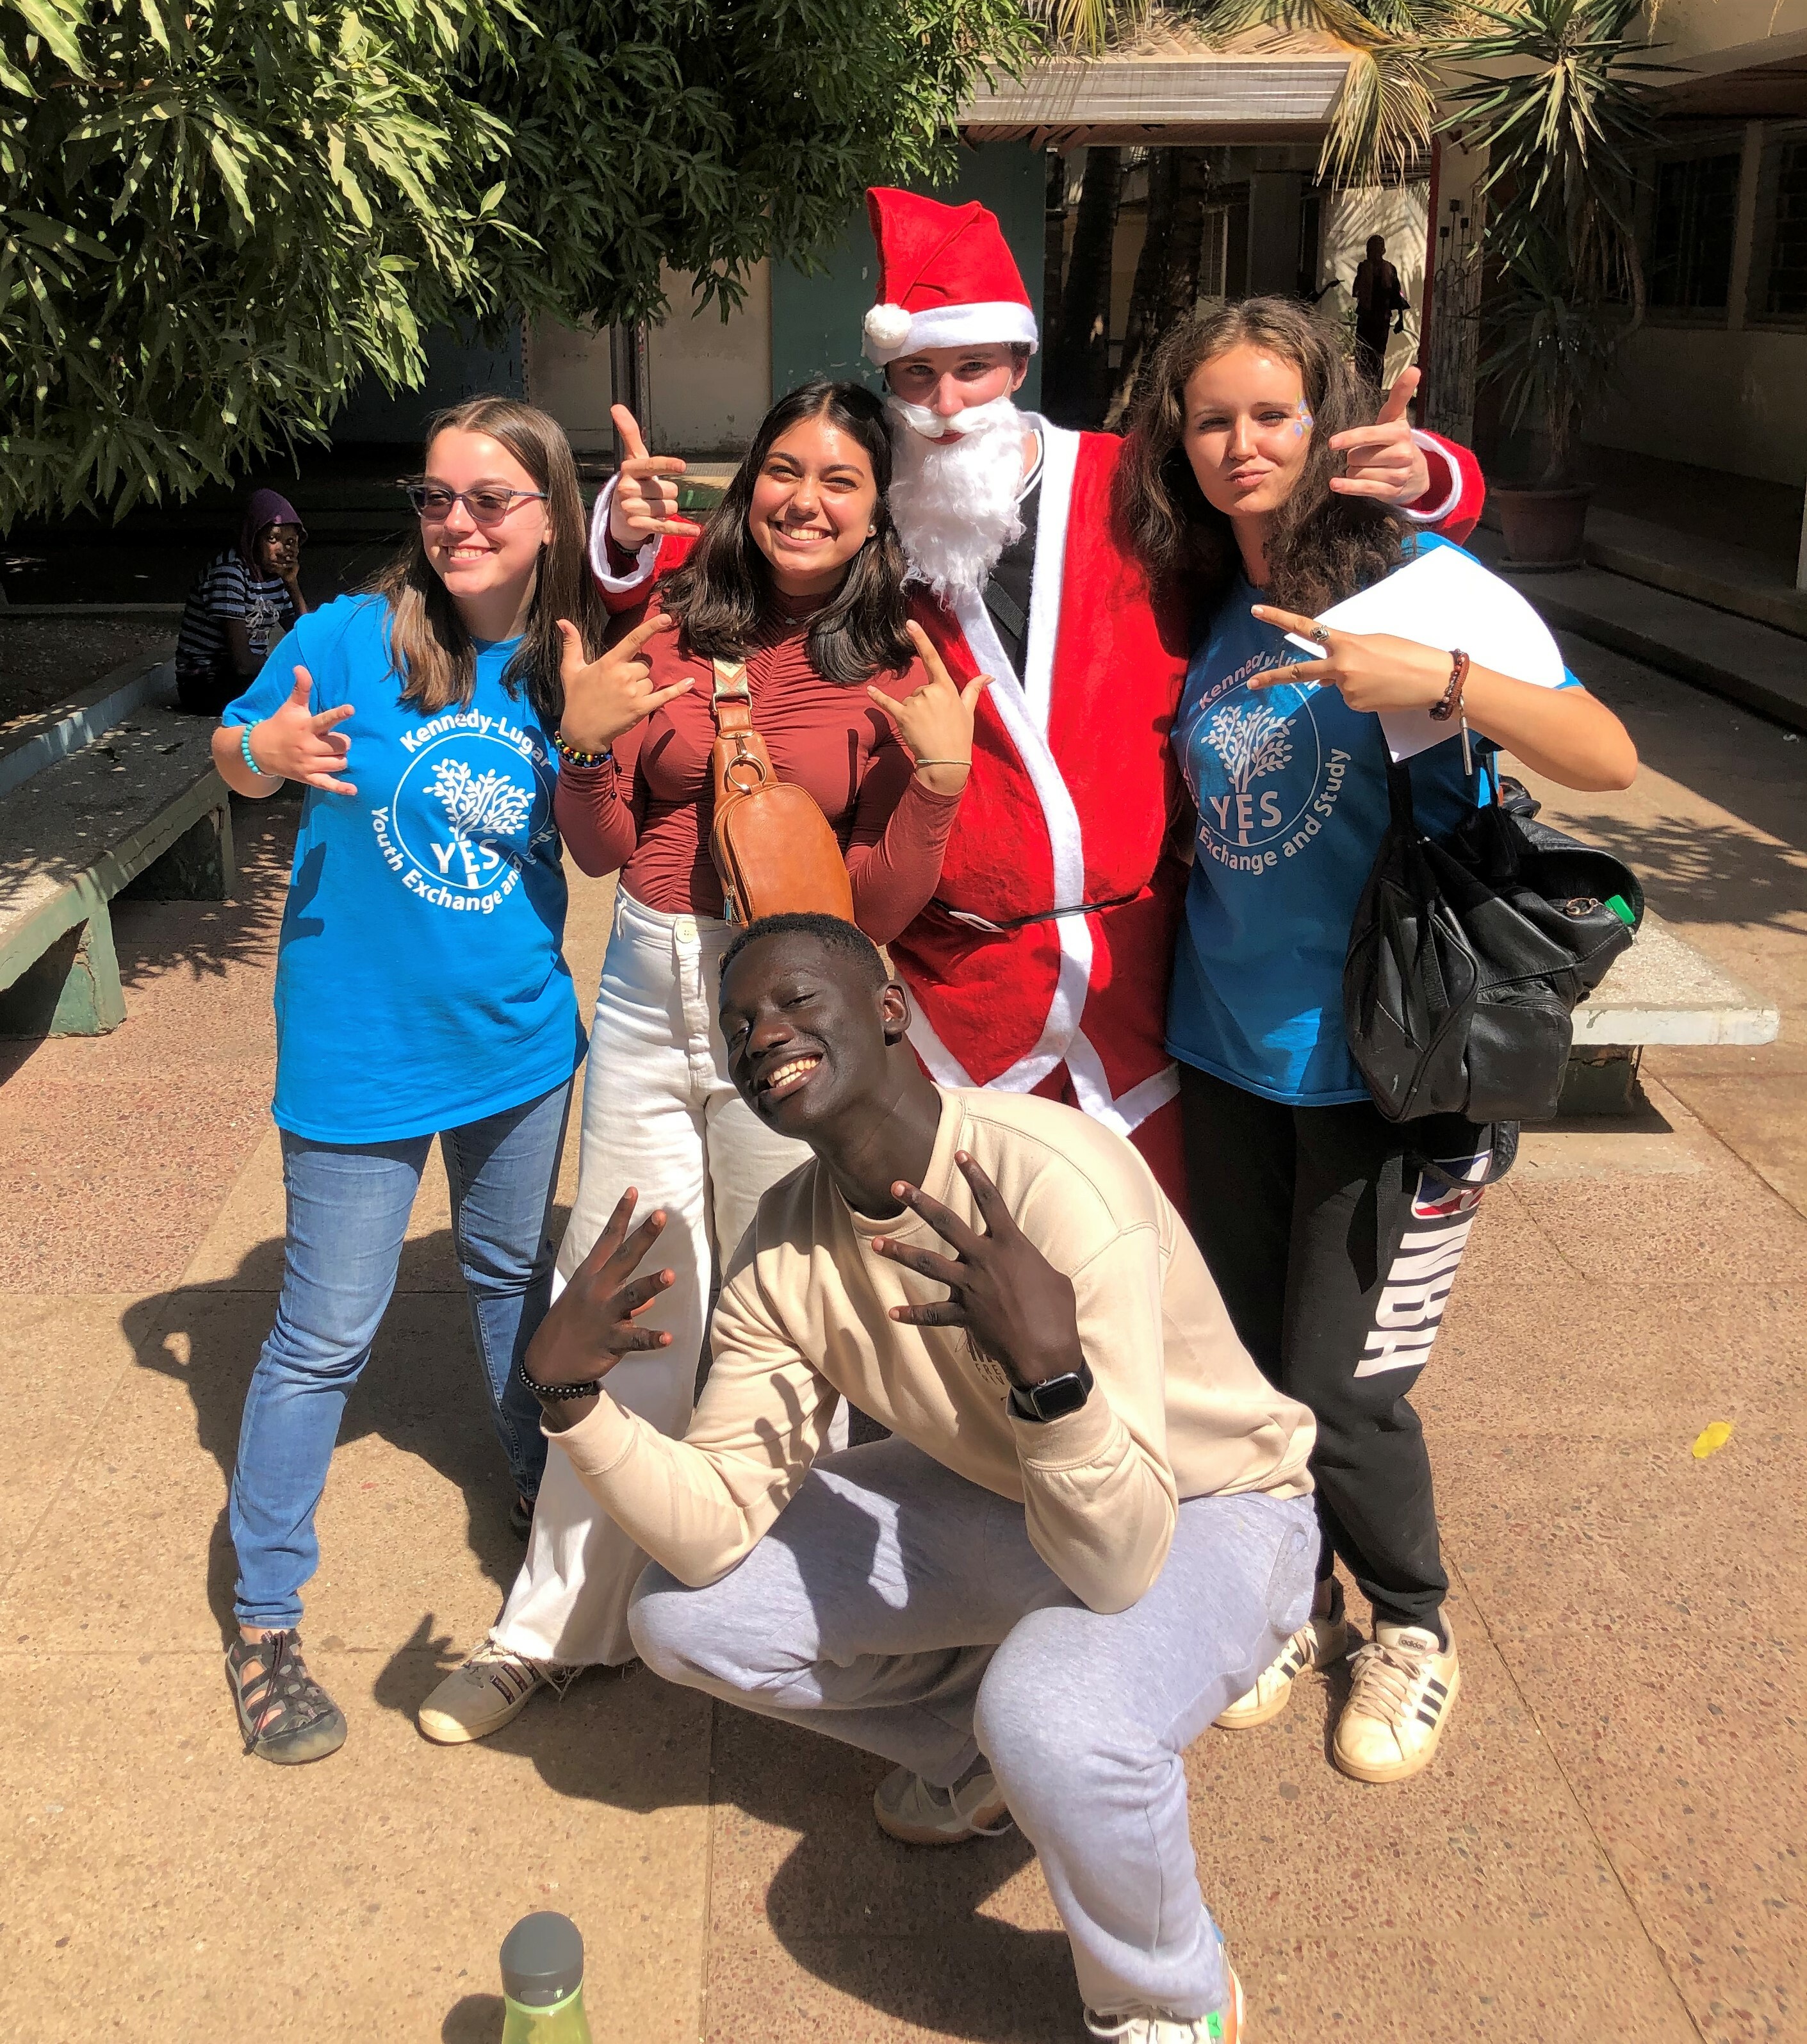 Four YES Abroad students (including one dressed as Santa) and one YES alumnus pose for the camera